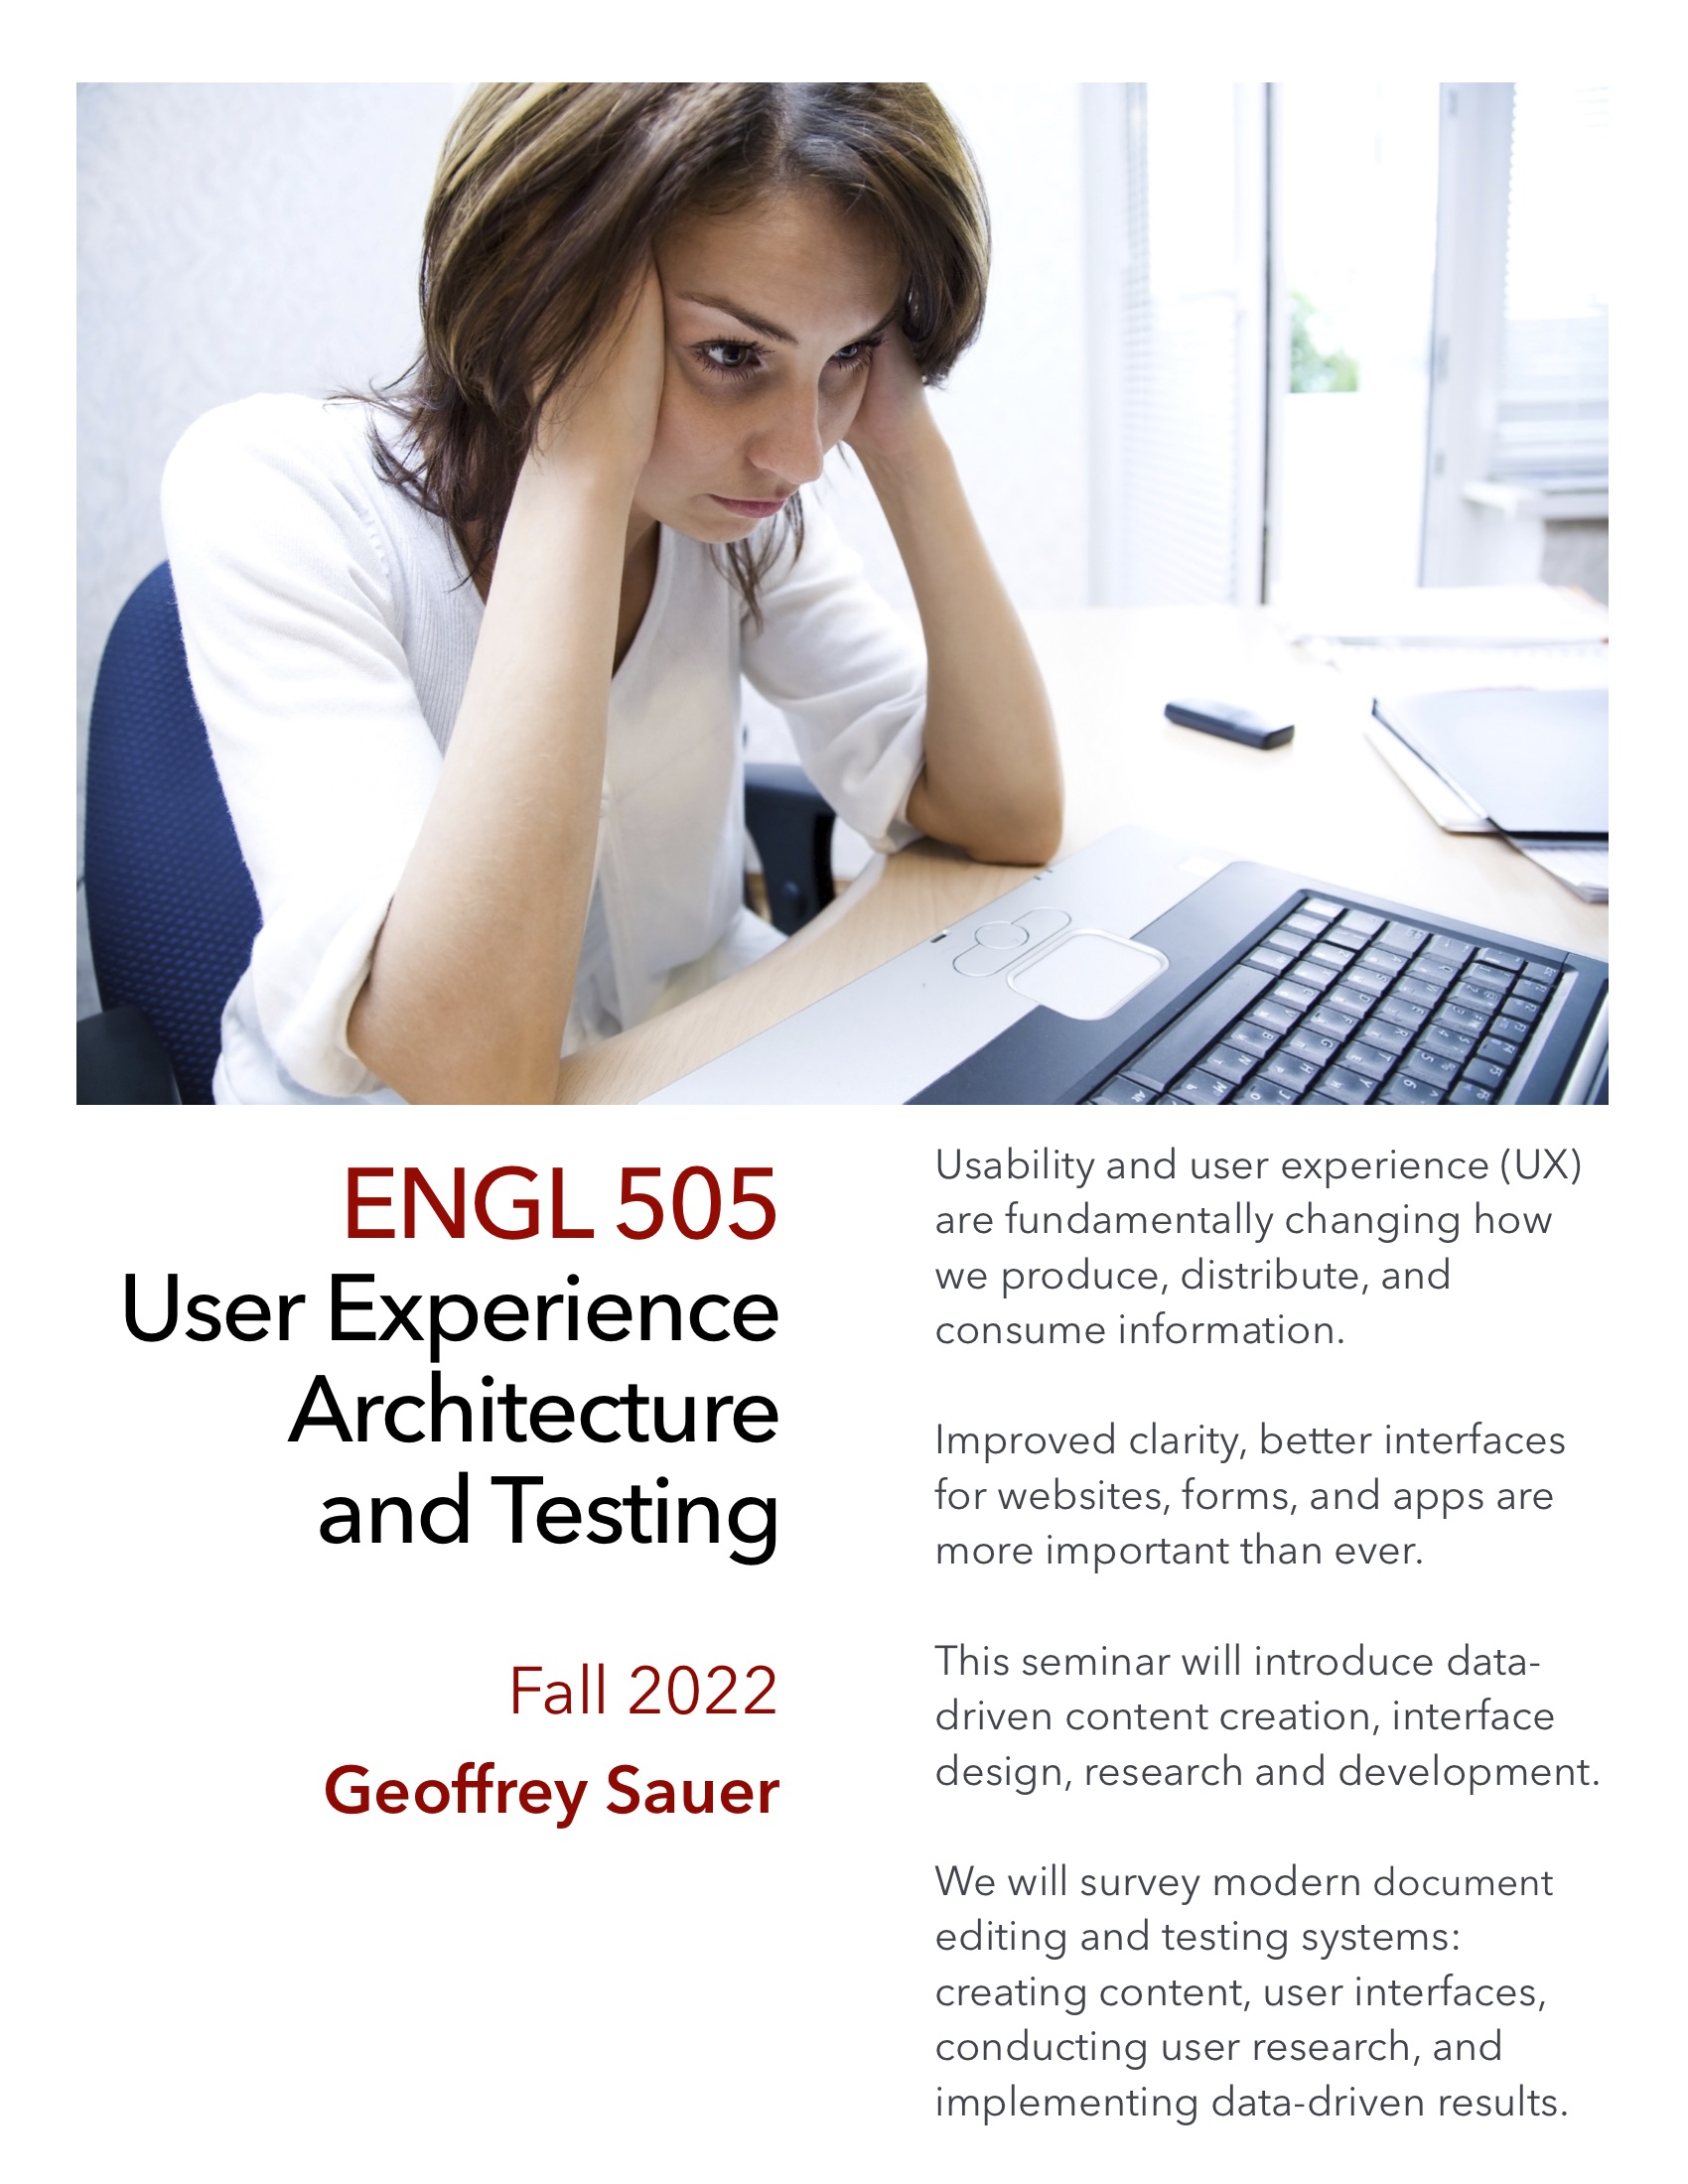 A flyer for my Usability and User Experience grad seminar.